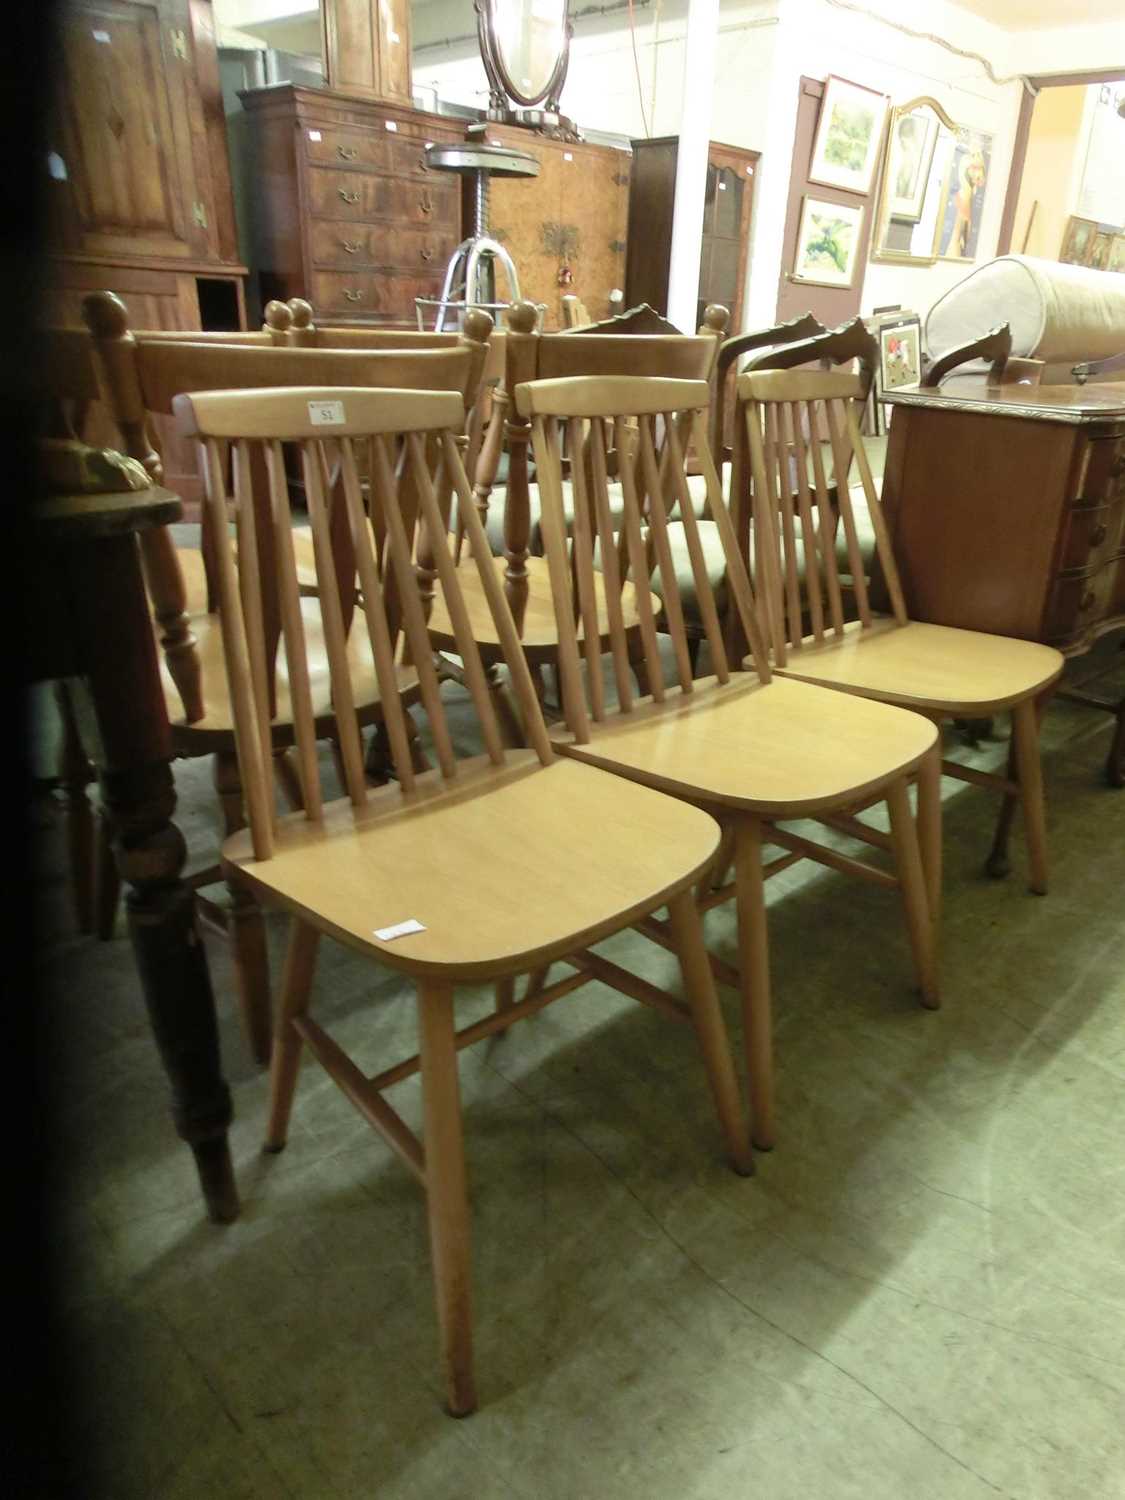 A set of three Ercol style chairs